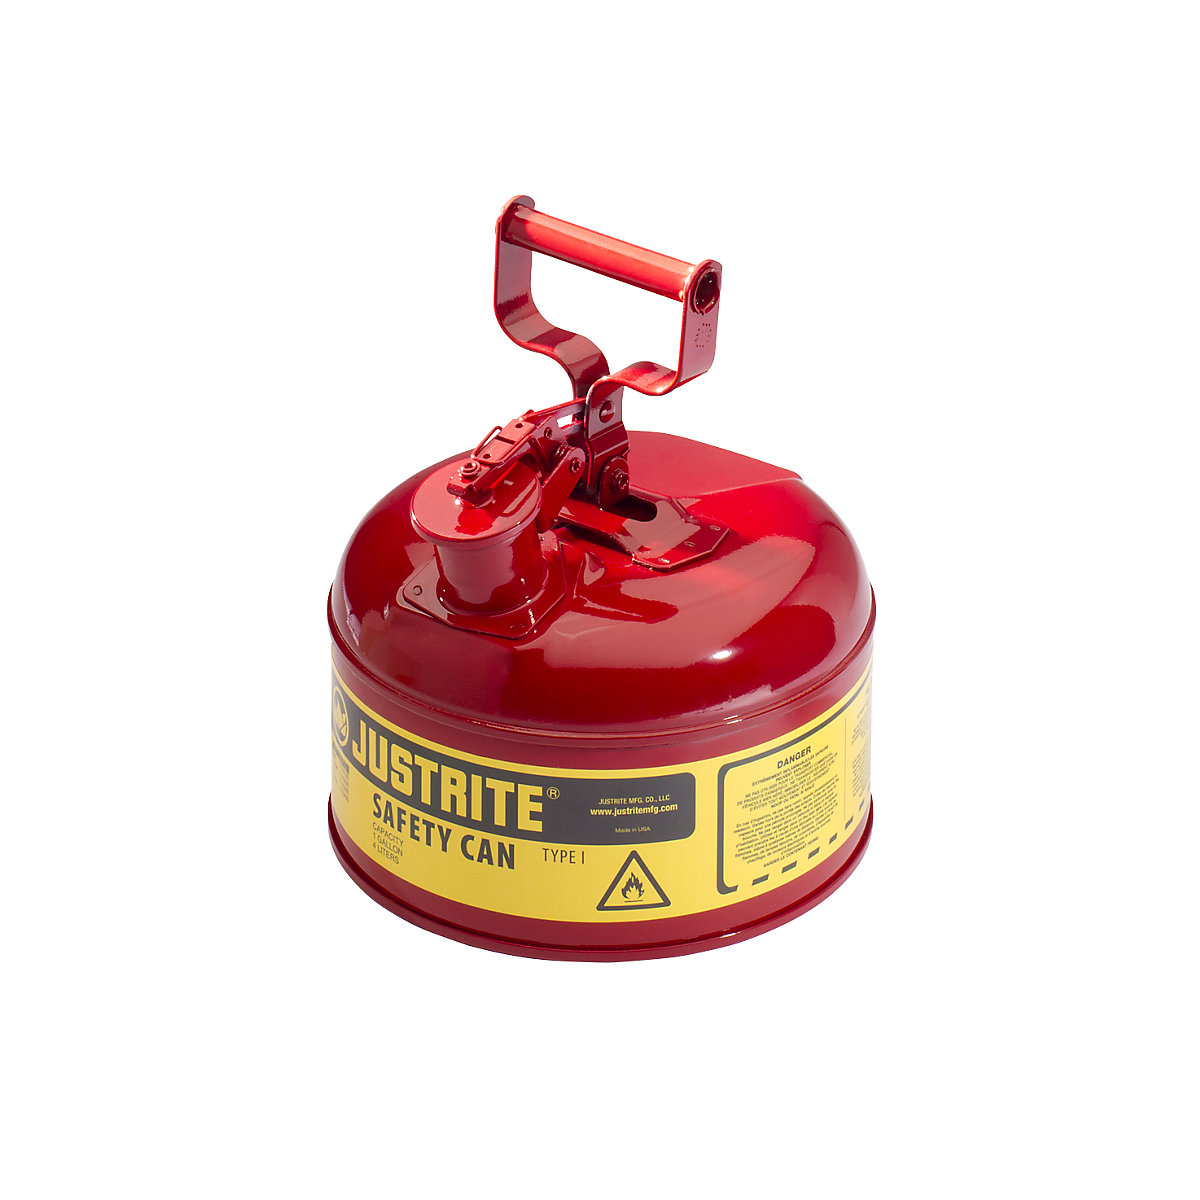 Steel safety container – Justrite